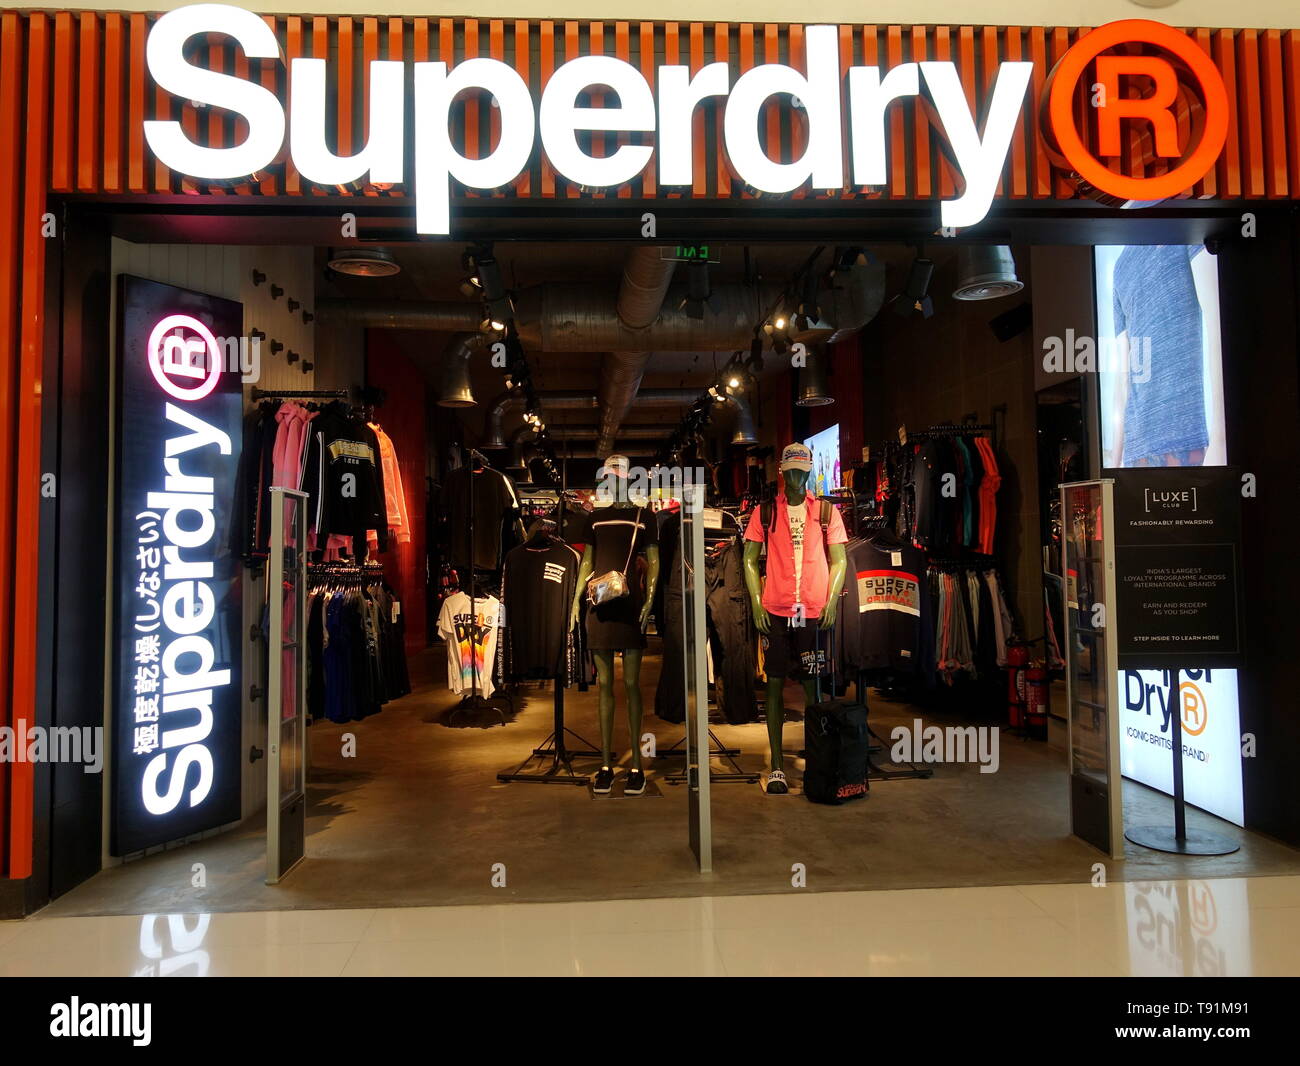 Cuisse parfum Banque superdry india Objection Trahison Garderobe